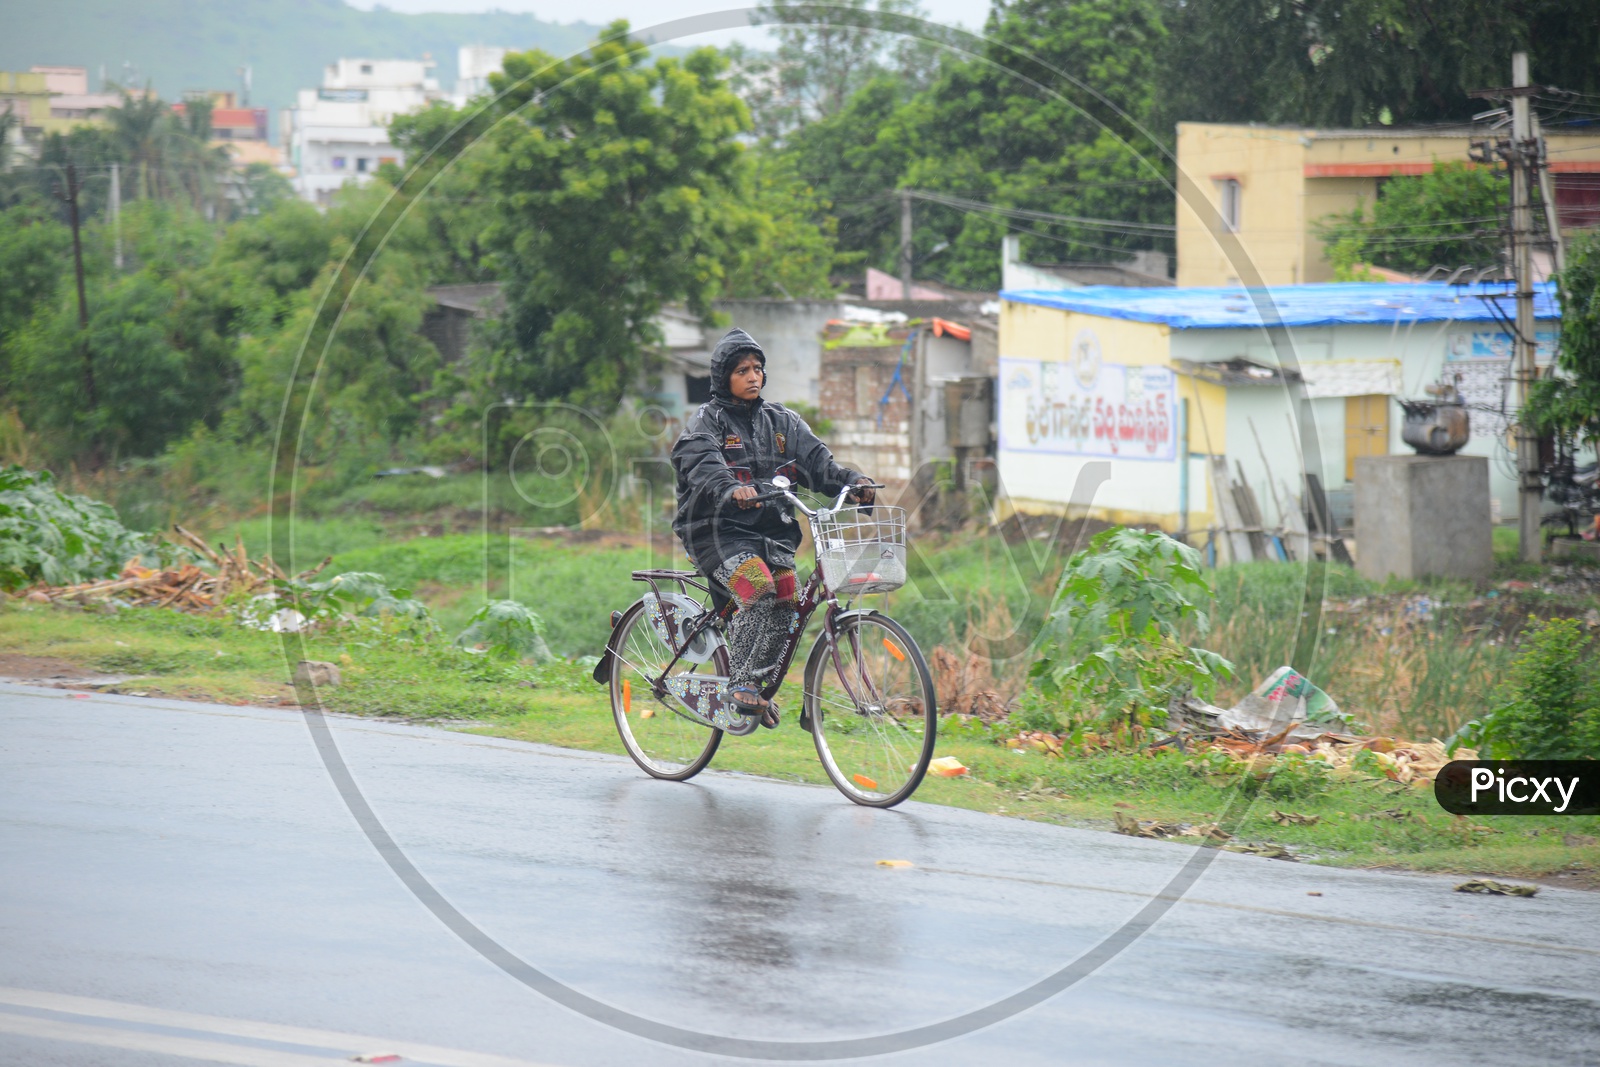 An Indian woman wearing raincoat and riding a bicycle